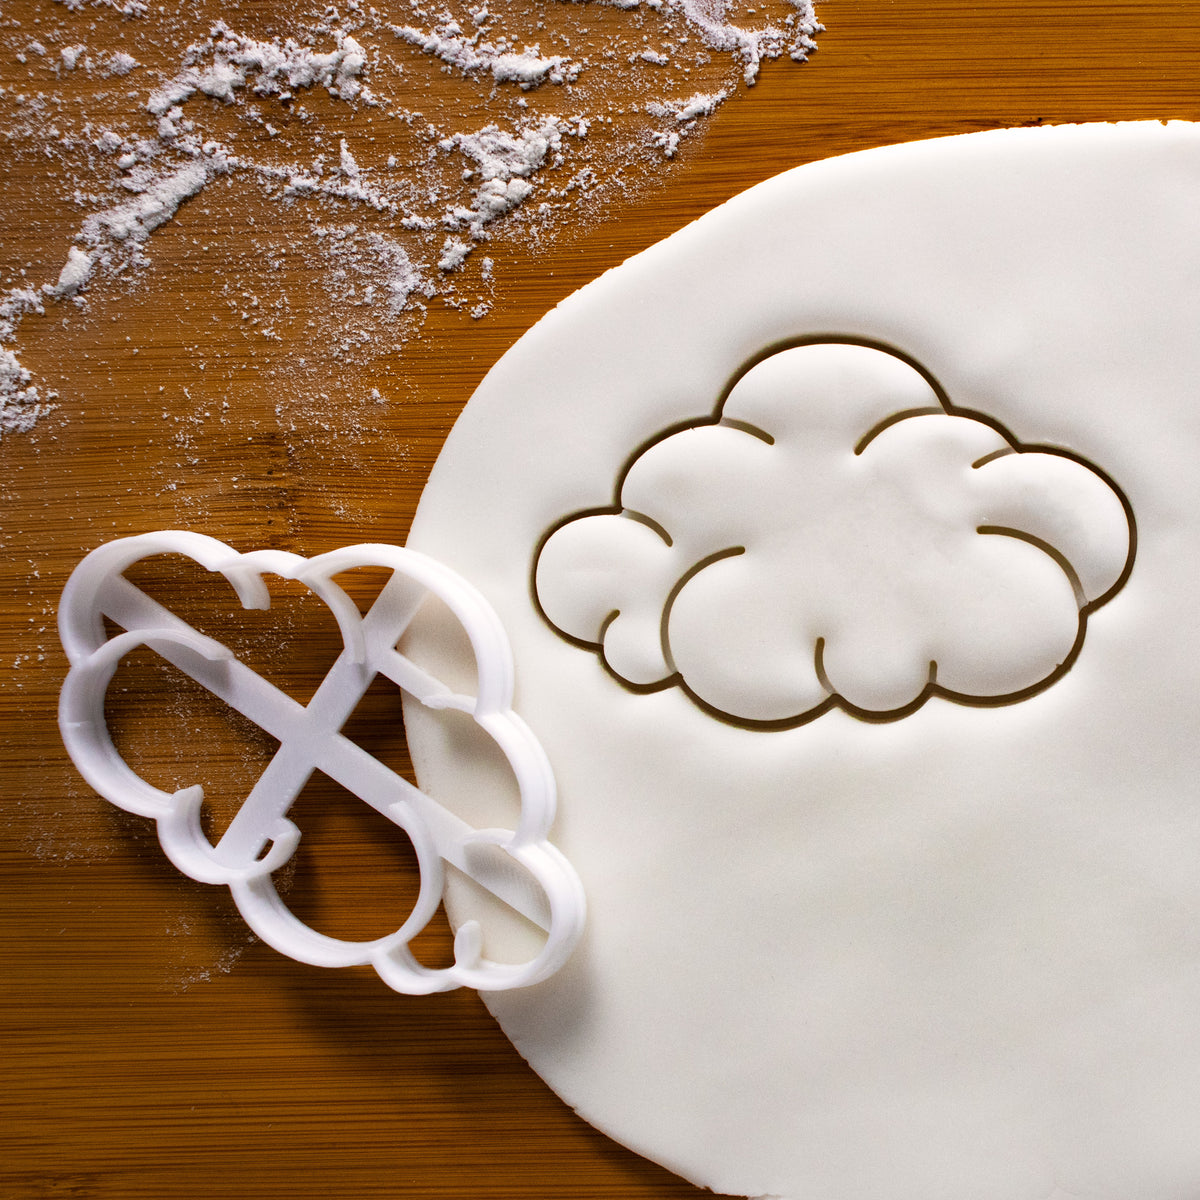 Fluffy Cloud Cookie Cutter pressed on fondant